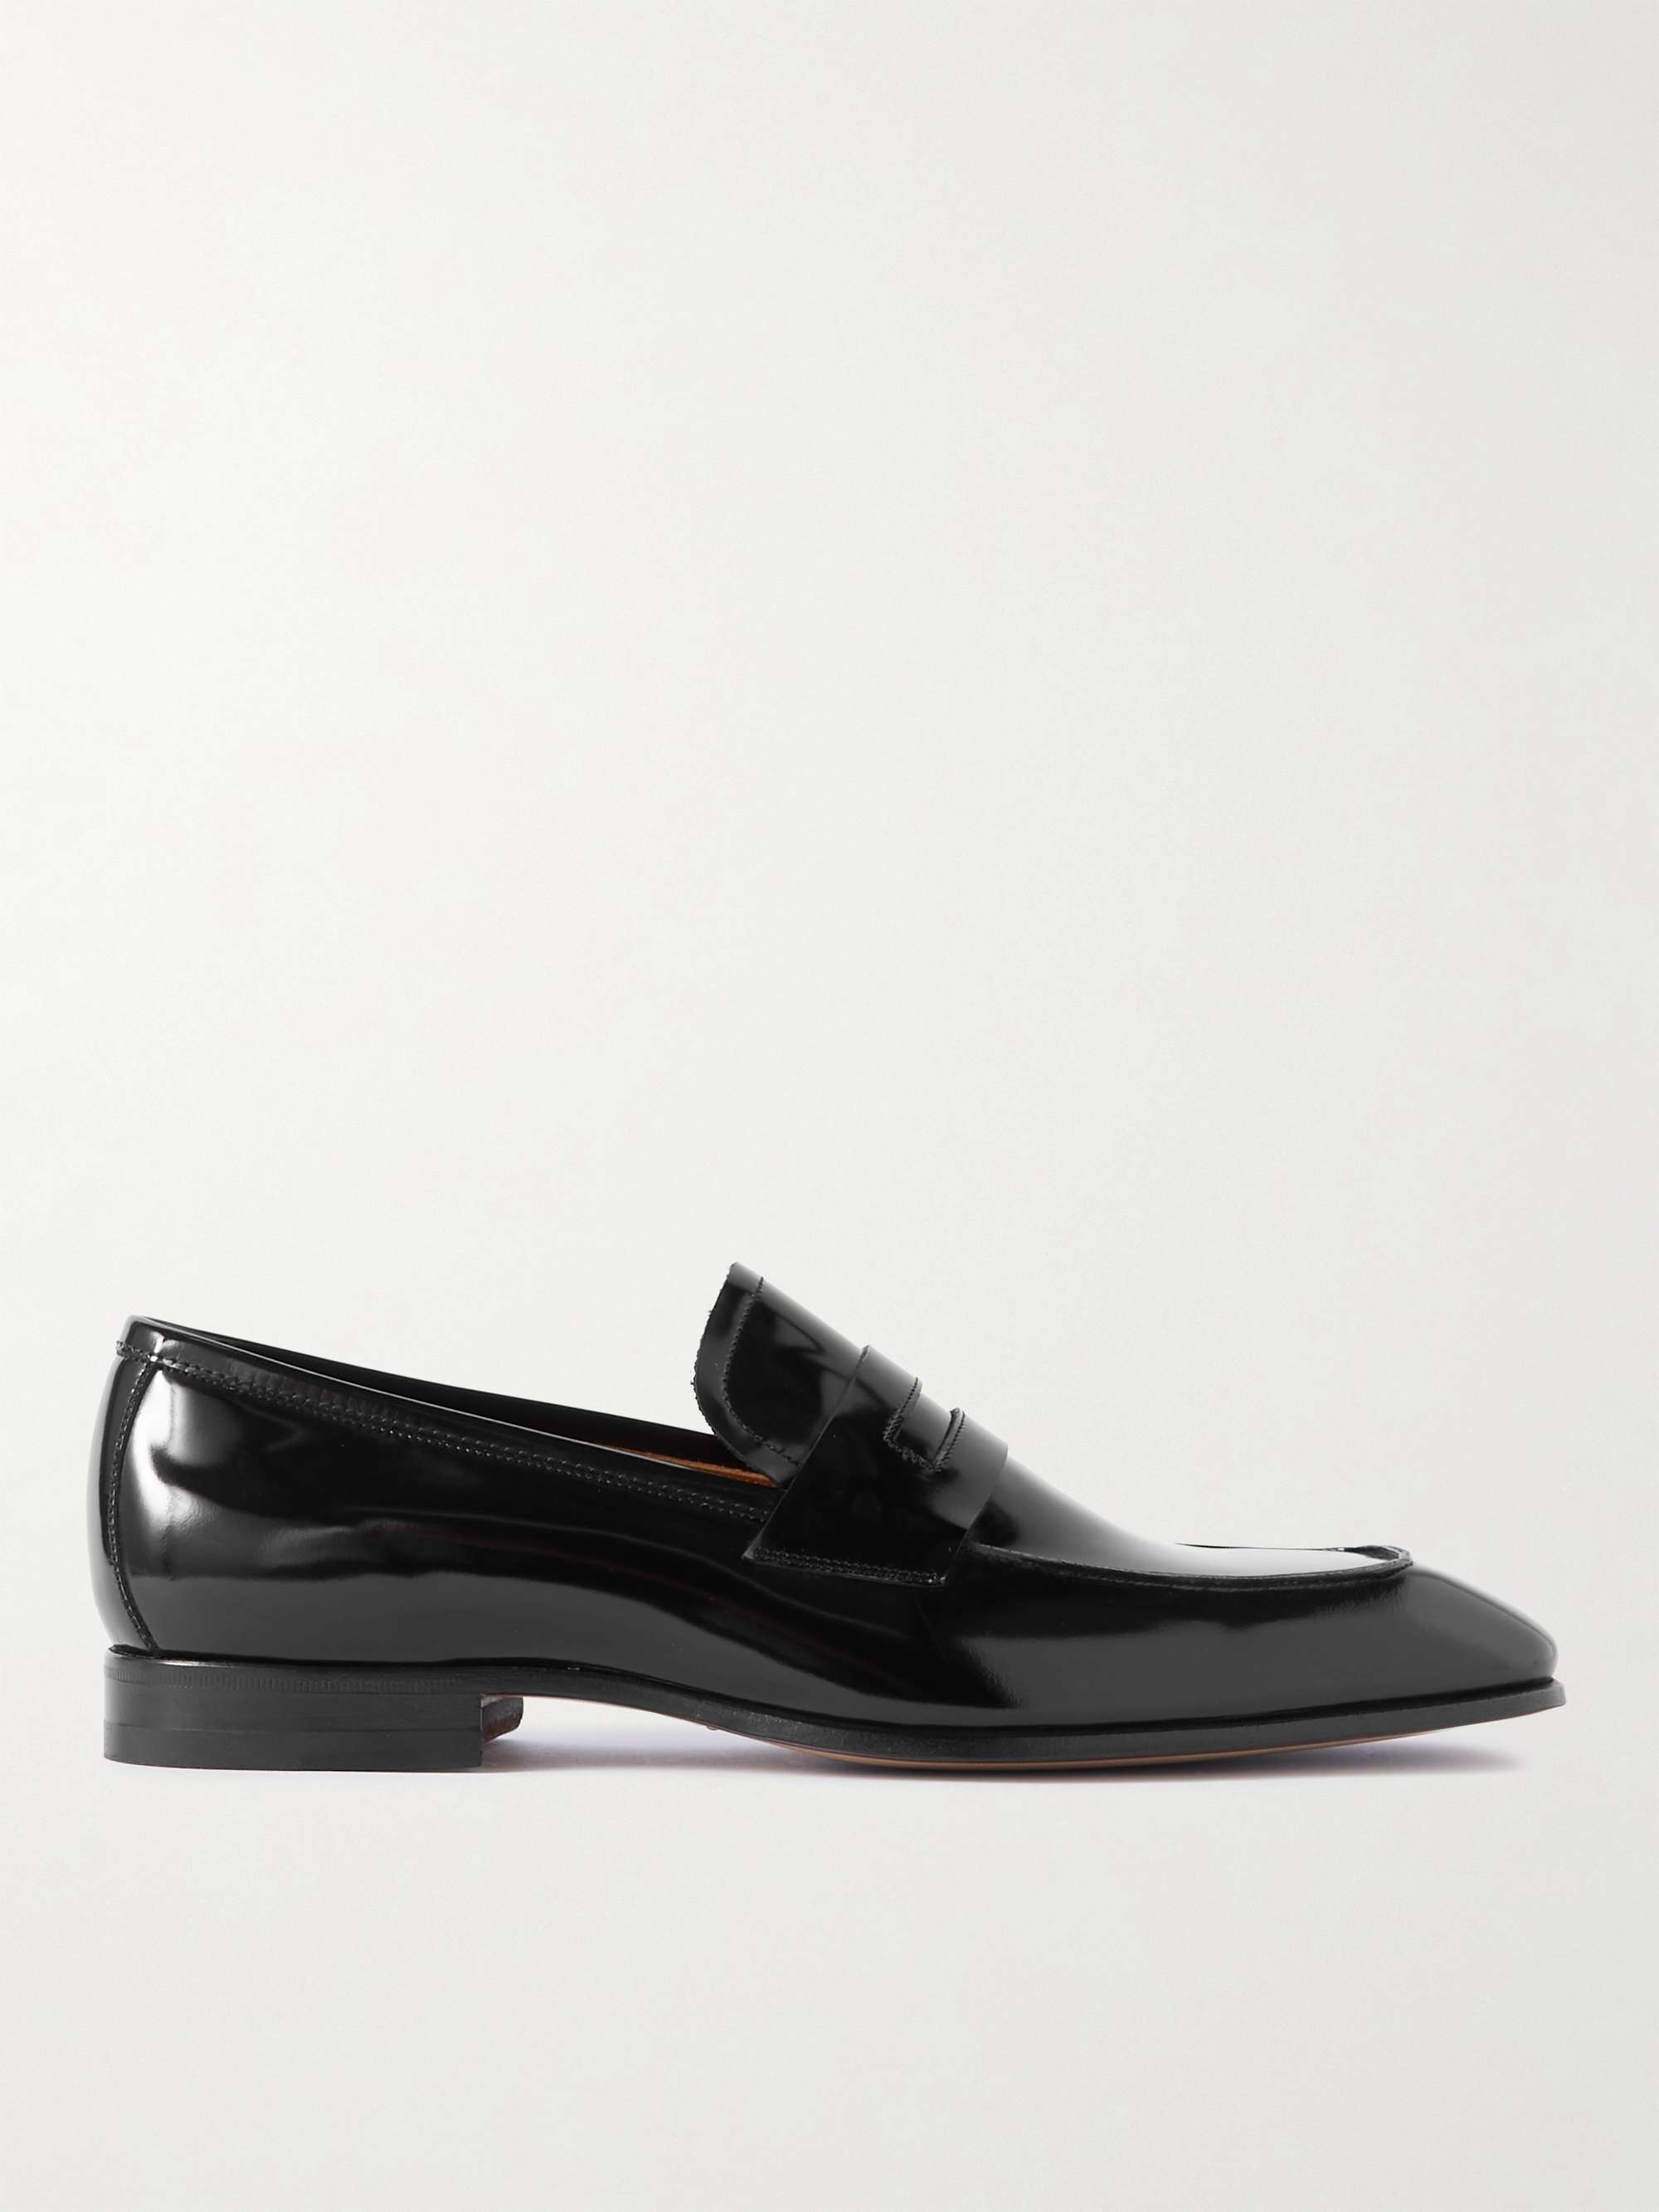 Tom Ford - Men - Bailey Patent-leather Penny Loafers Black - UK 8